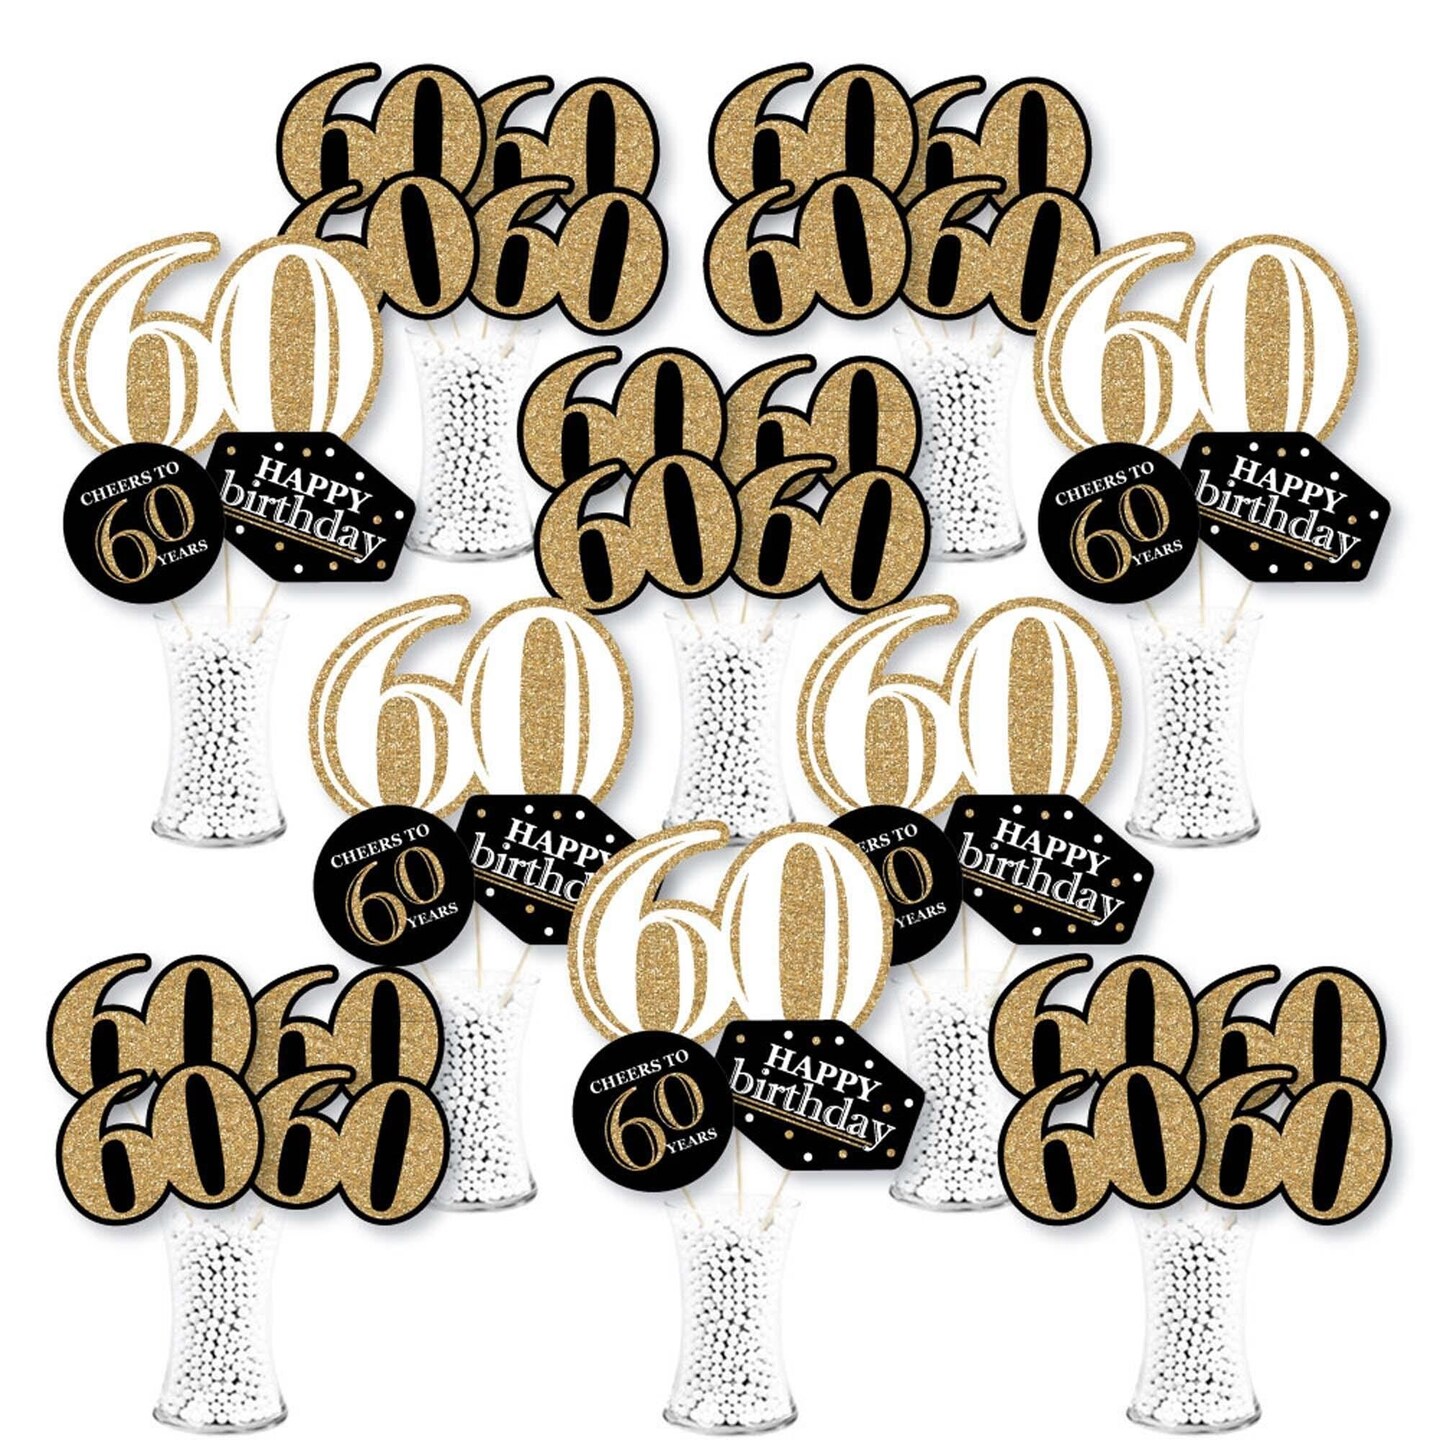 Big Dot of Happiness Adult 60th Birthday - Gold - Birthday Party Centerpiece Sticks - Showstopper Table Toppers - 35 Pieces